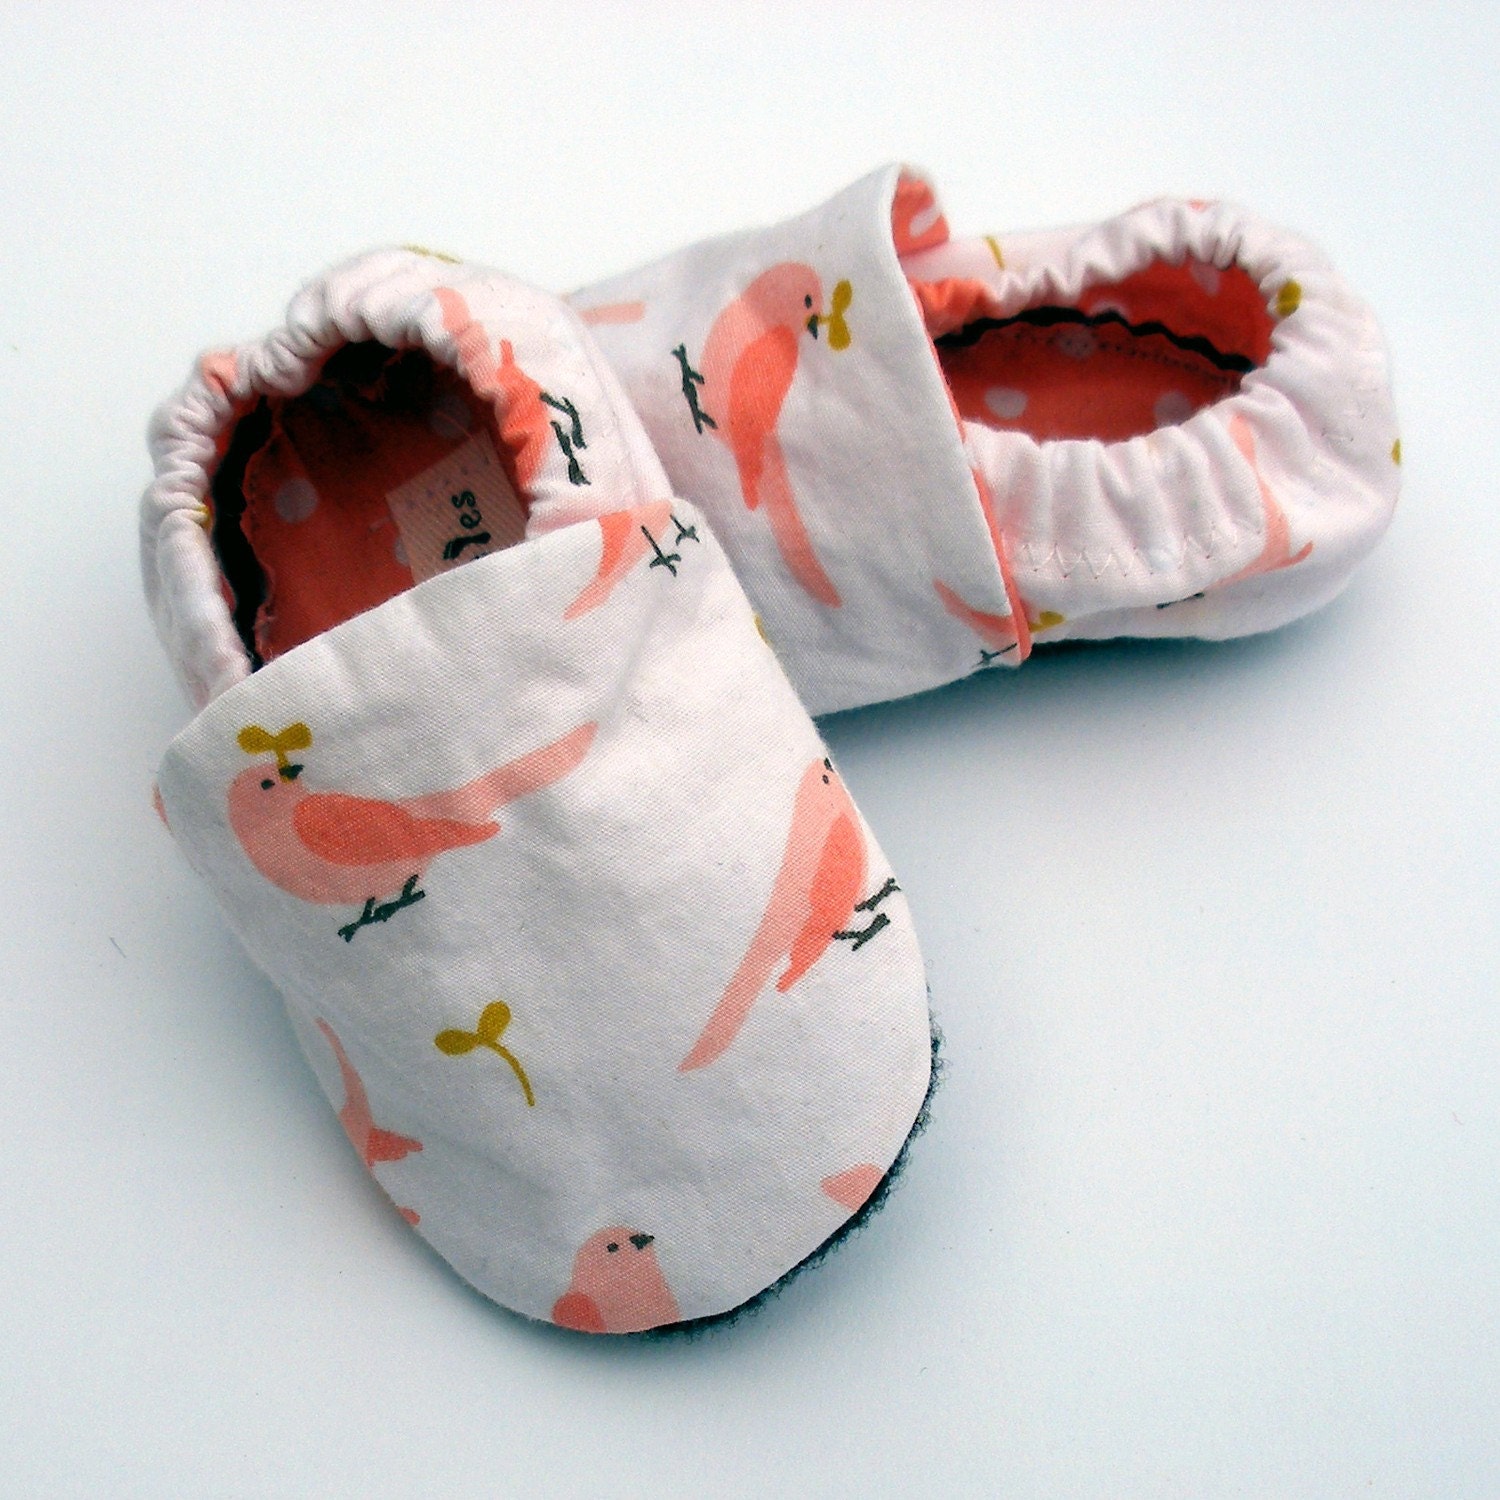 Organic Cotton Pink Bird Handmade Baby Shoes with Eco Felt Soles- Size 0 3 6 9 12 18 24 months